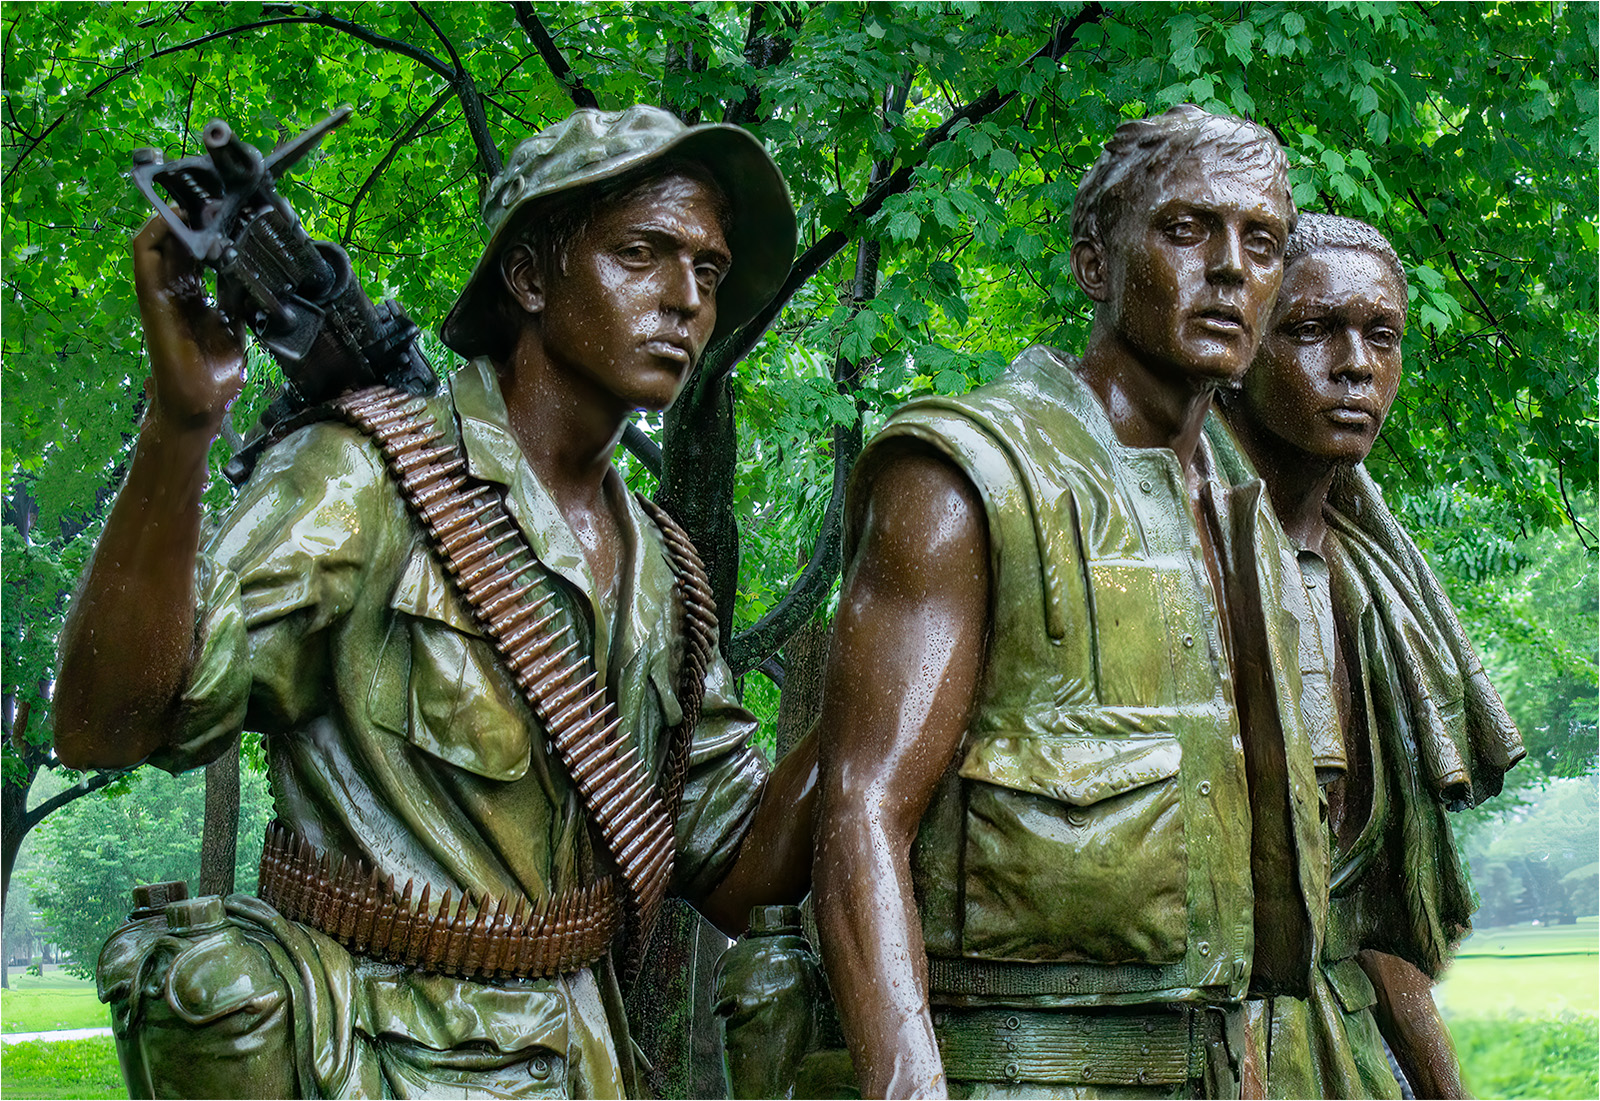 THE THREE SERVICEMEN STATUE by Mark Taylor